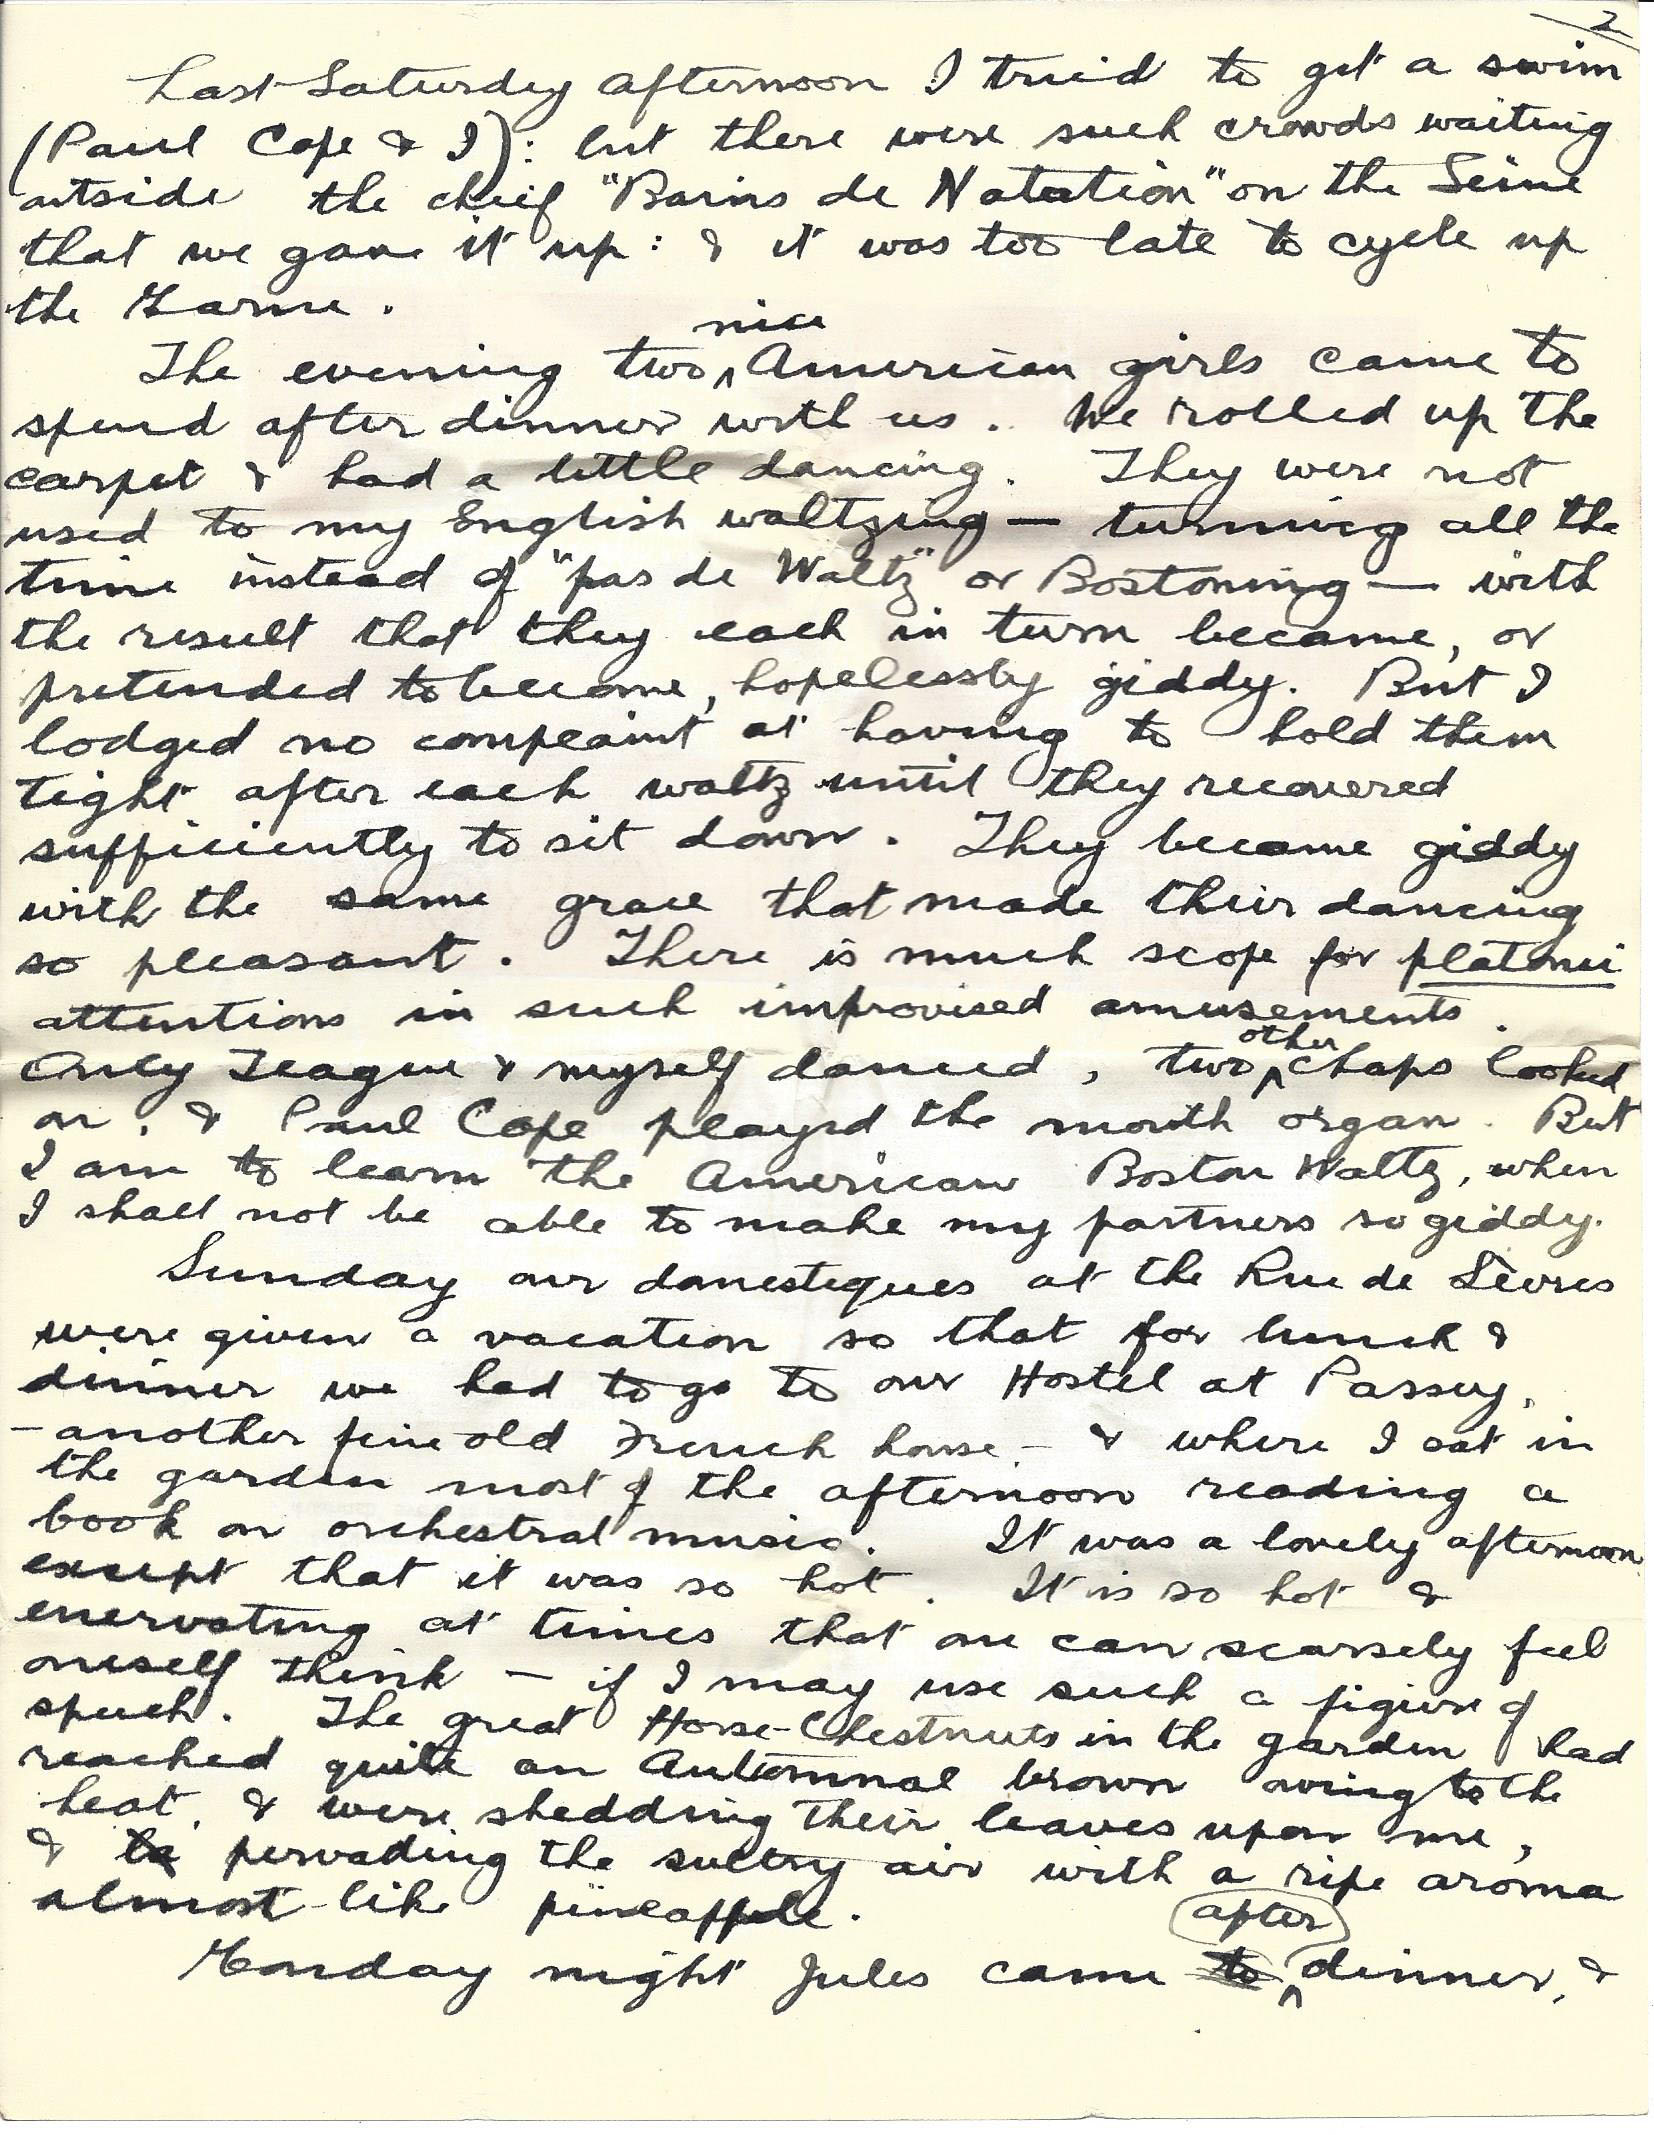 1919-08-16 p2 Donald Bearman letter to his father